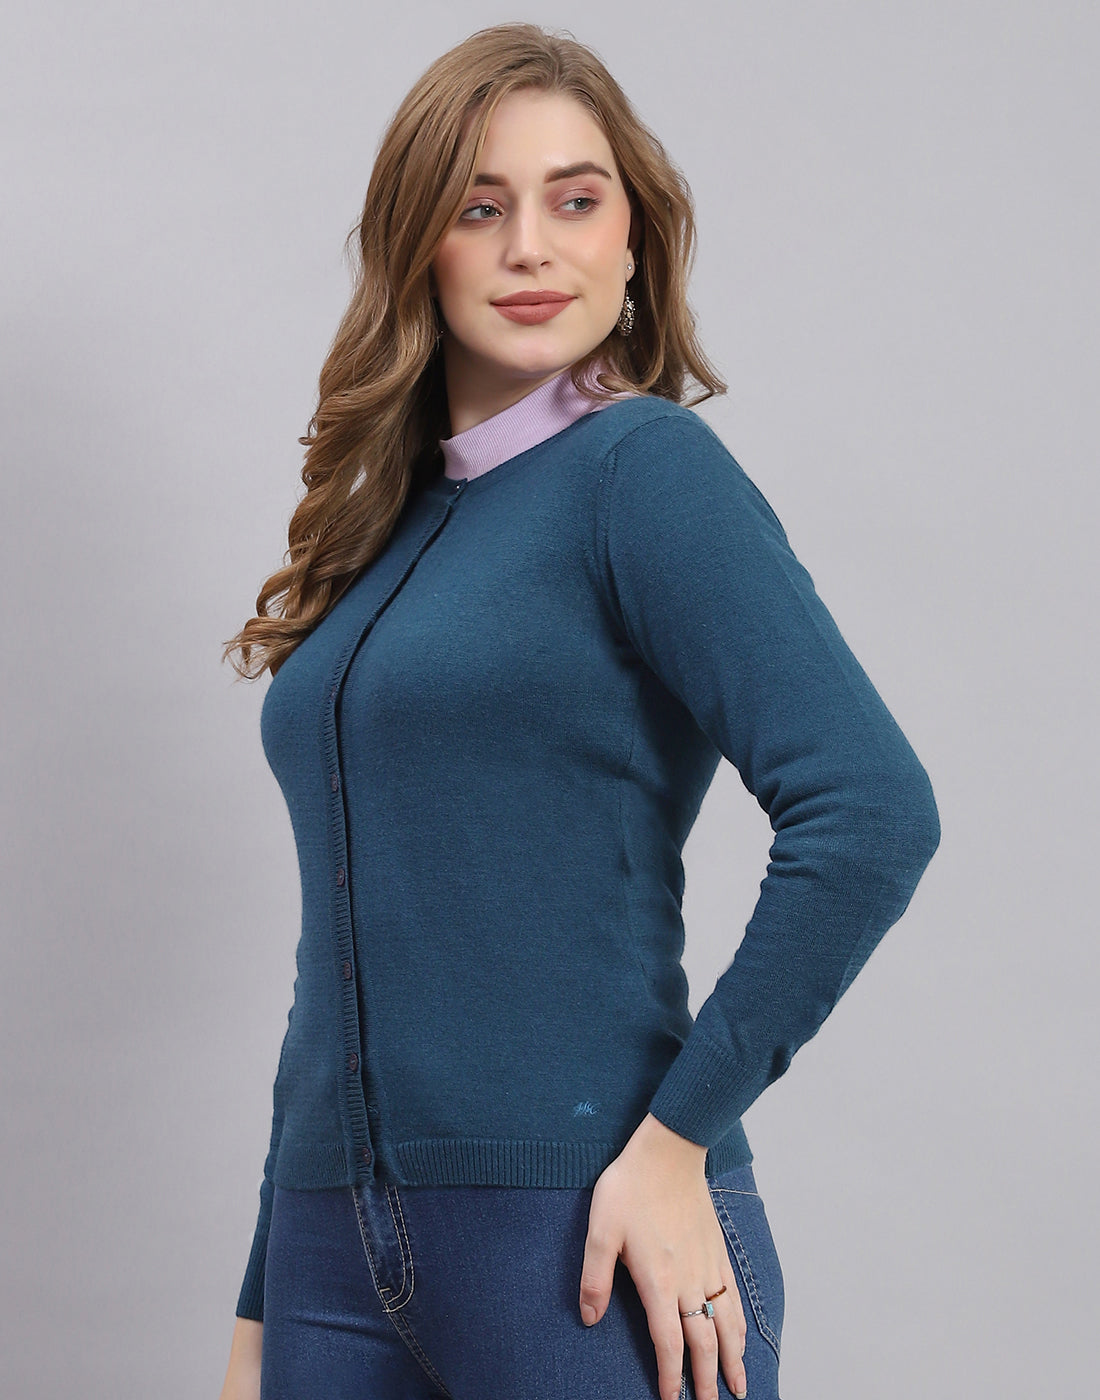 Women Teal Blue Solid Round Neck Full Sleeve Sweater